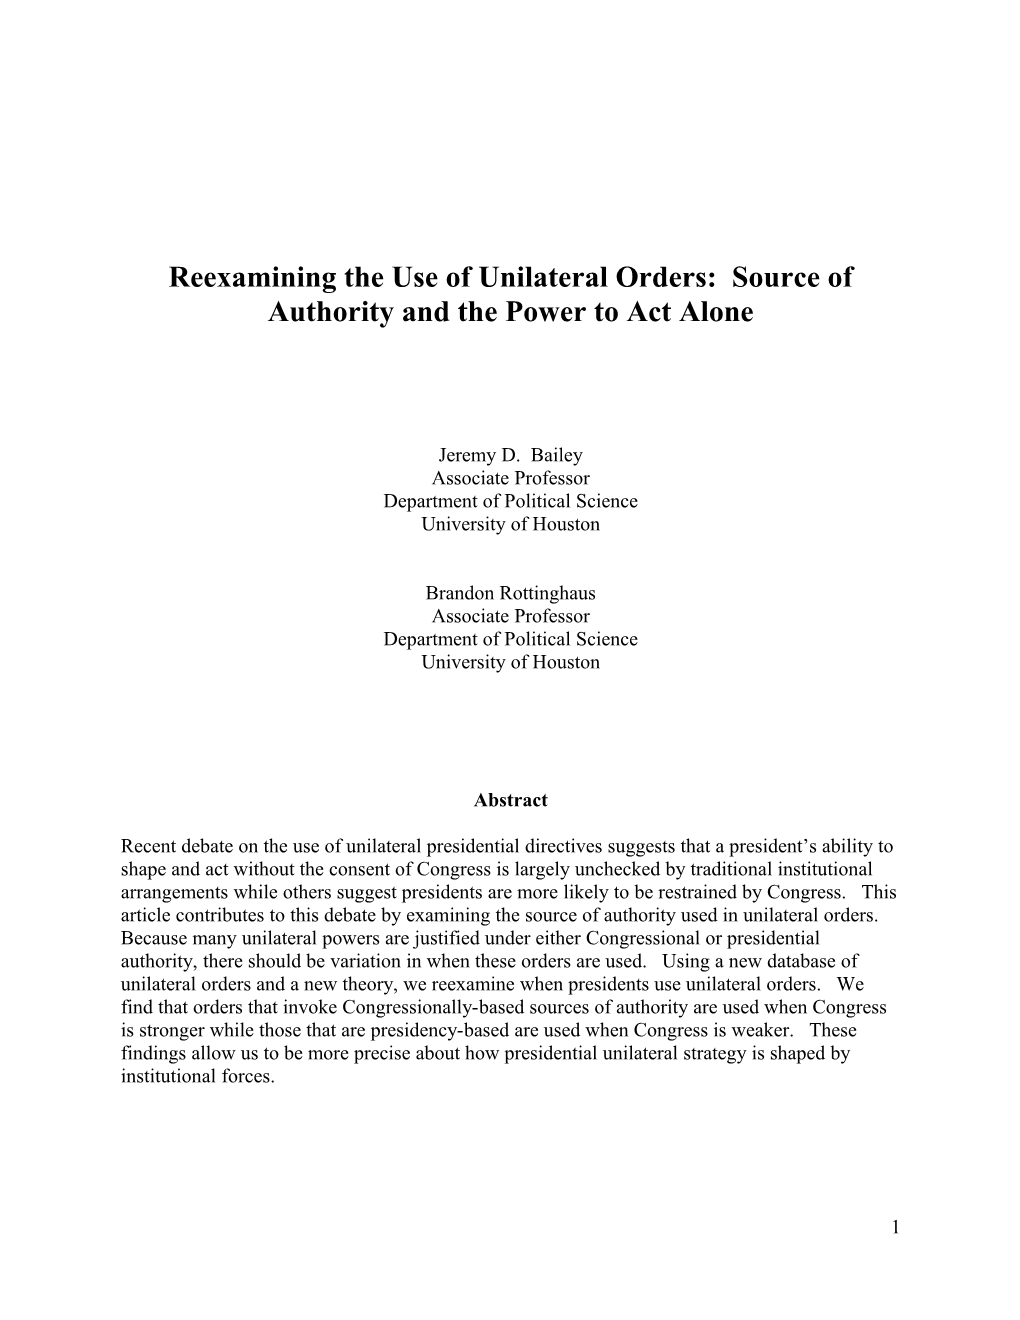 Reexamining Competing Theories of the Unilateral Politics: Source of Authority and The